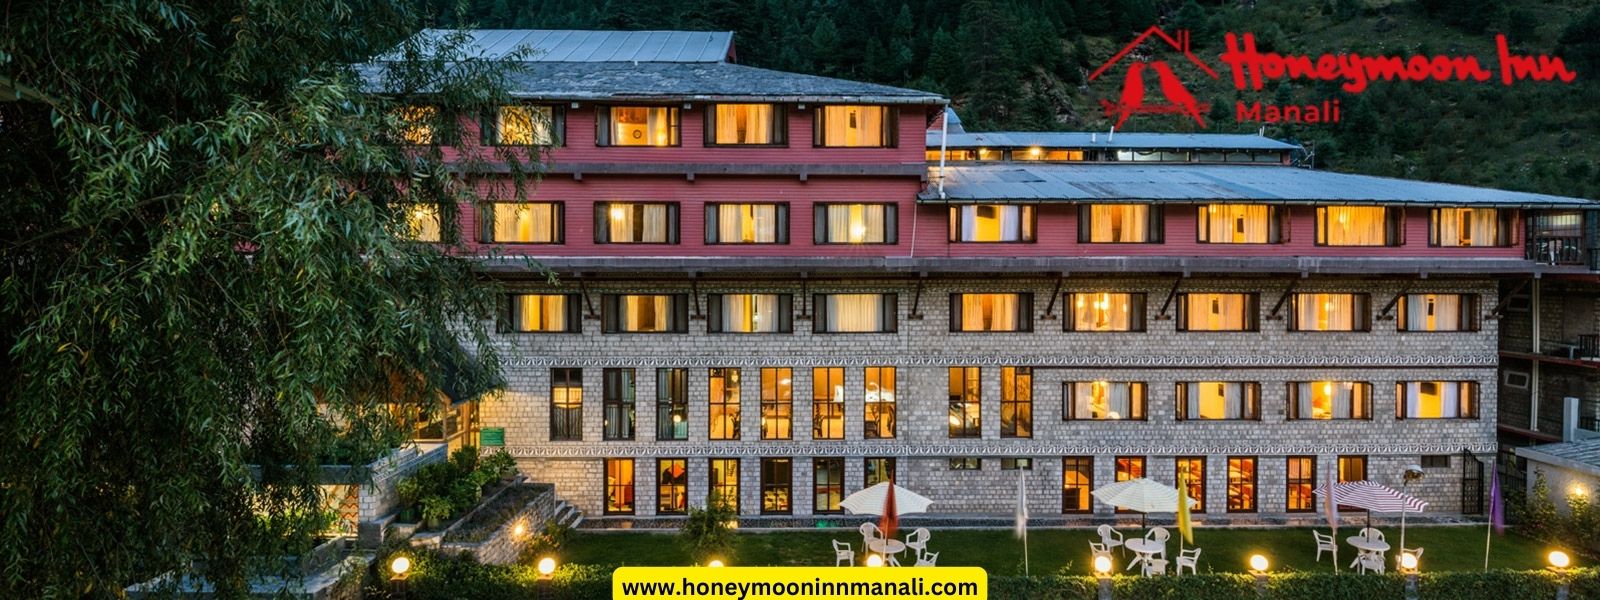 Explore The Heaven On The Earth And Stay At The Cheap Manali Hotels - WriteUpCafe.com